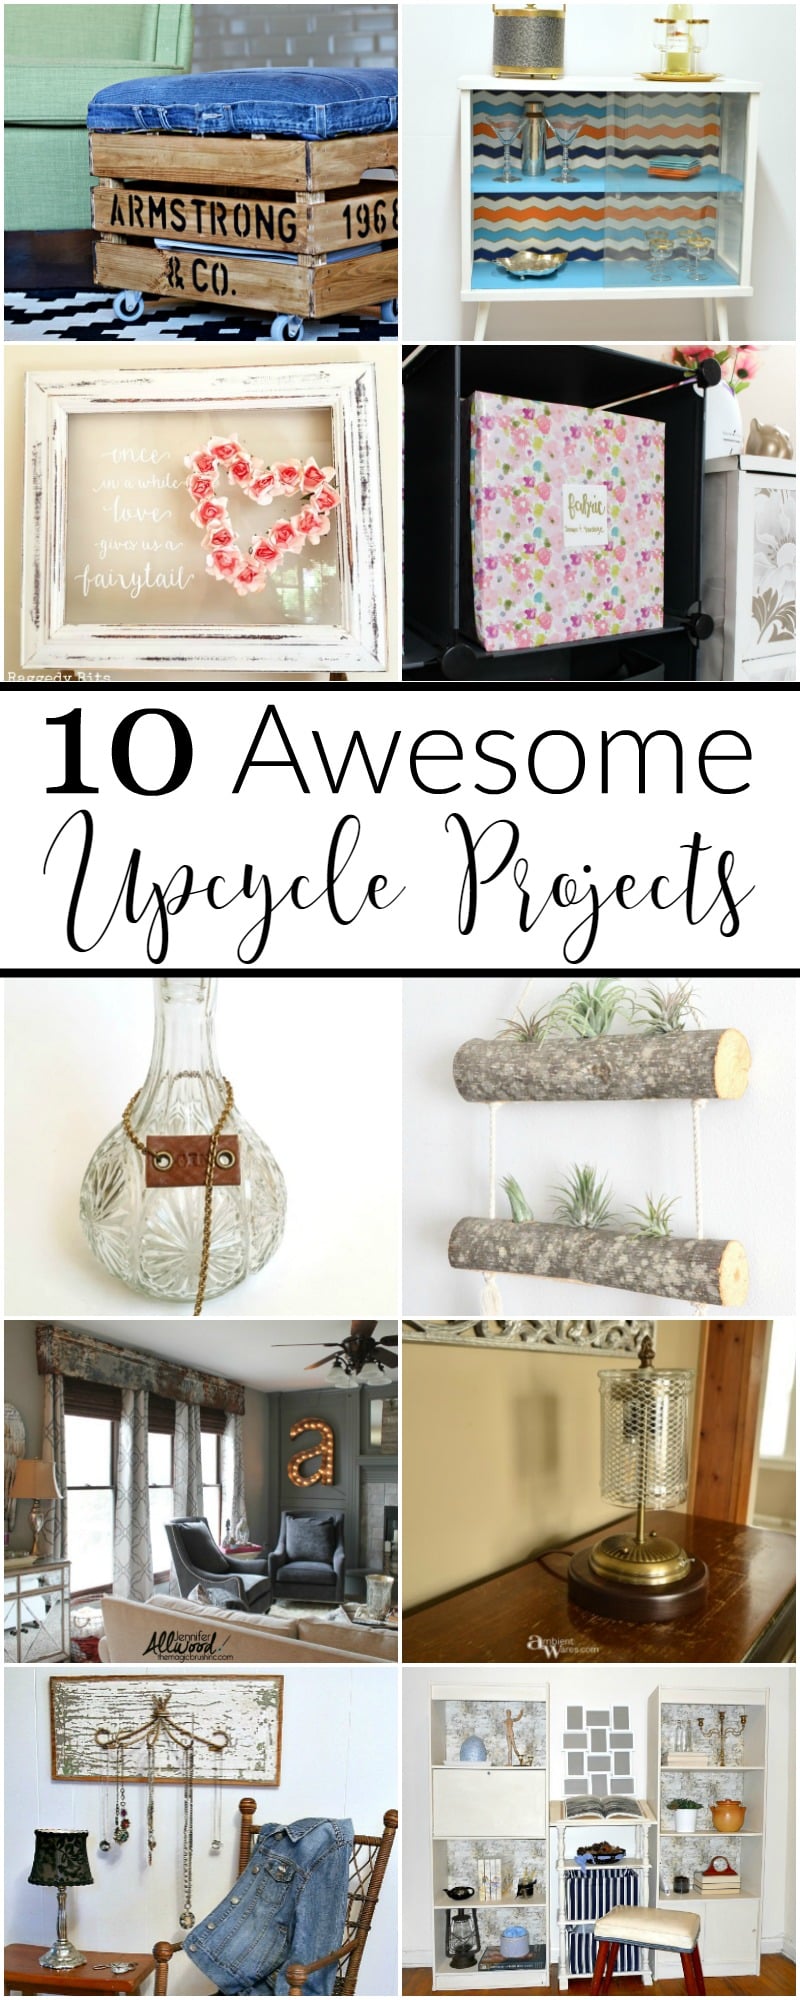 10 Awesome Upcycle Projects | Merry Monday Link Party